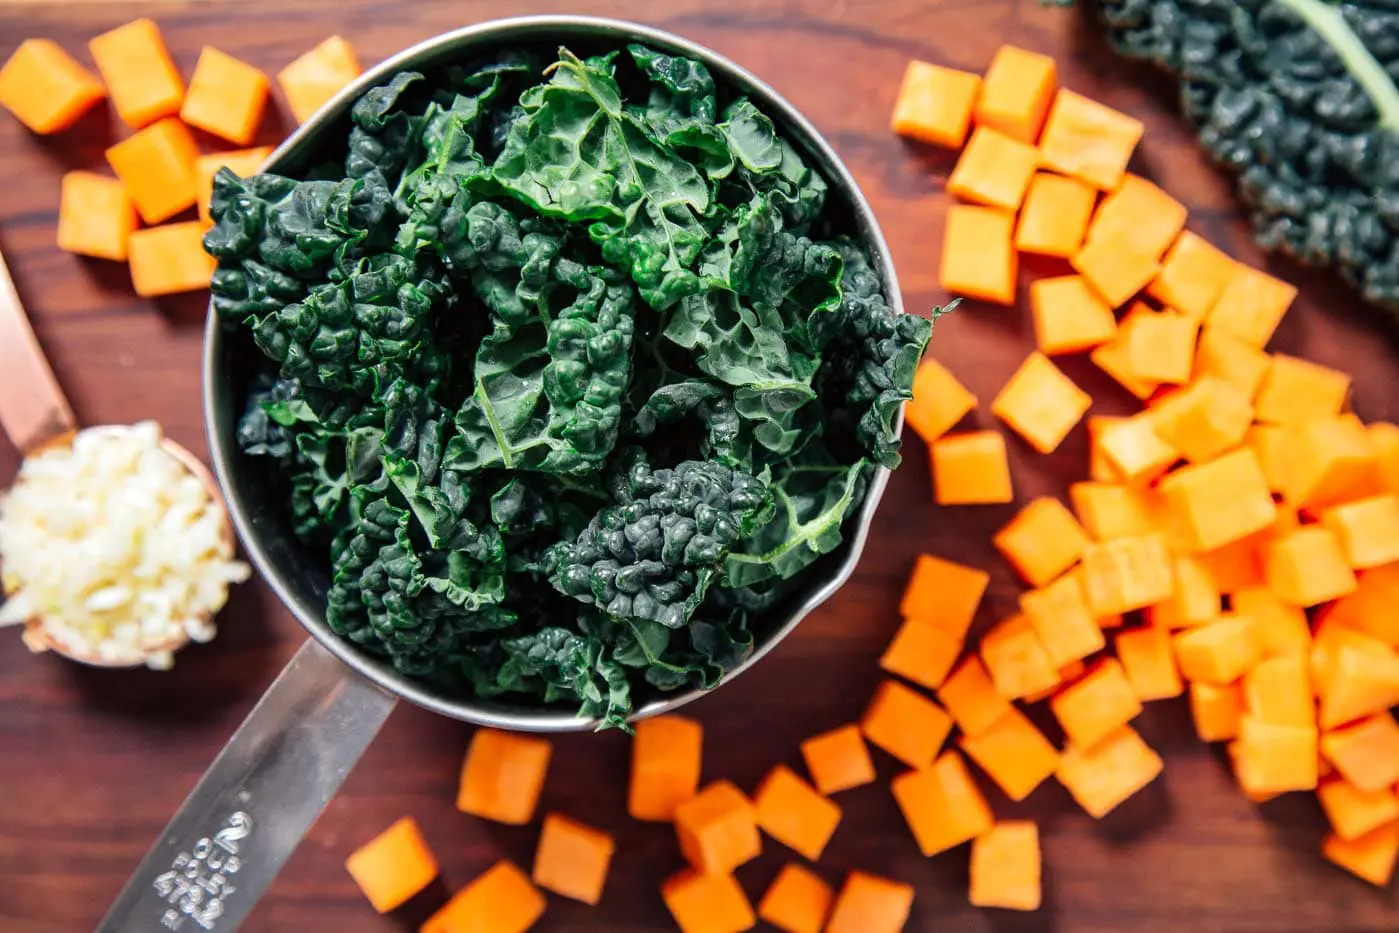 Kale in a measuring cup next to cubed sweet potato on a cutting board